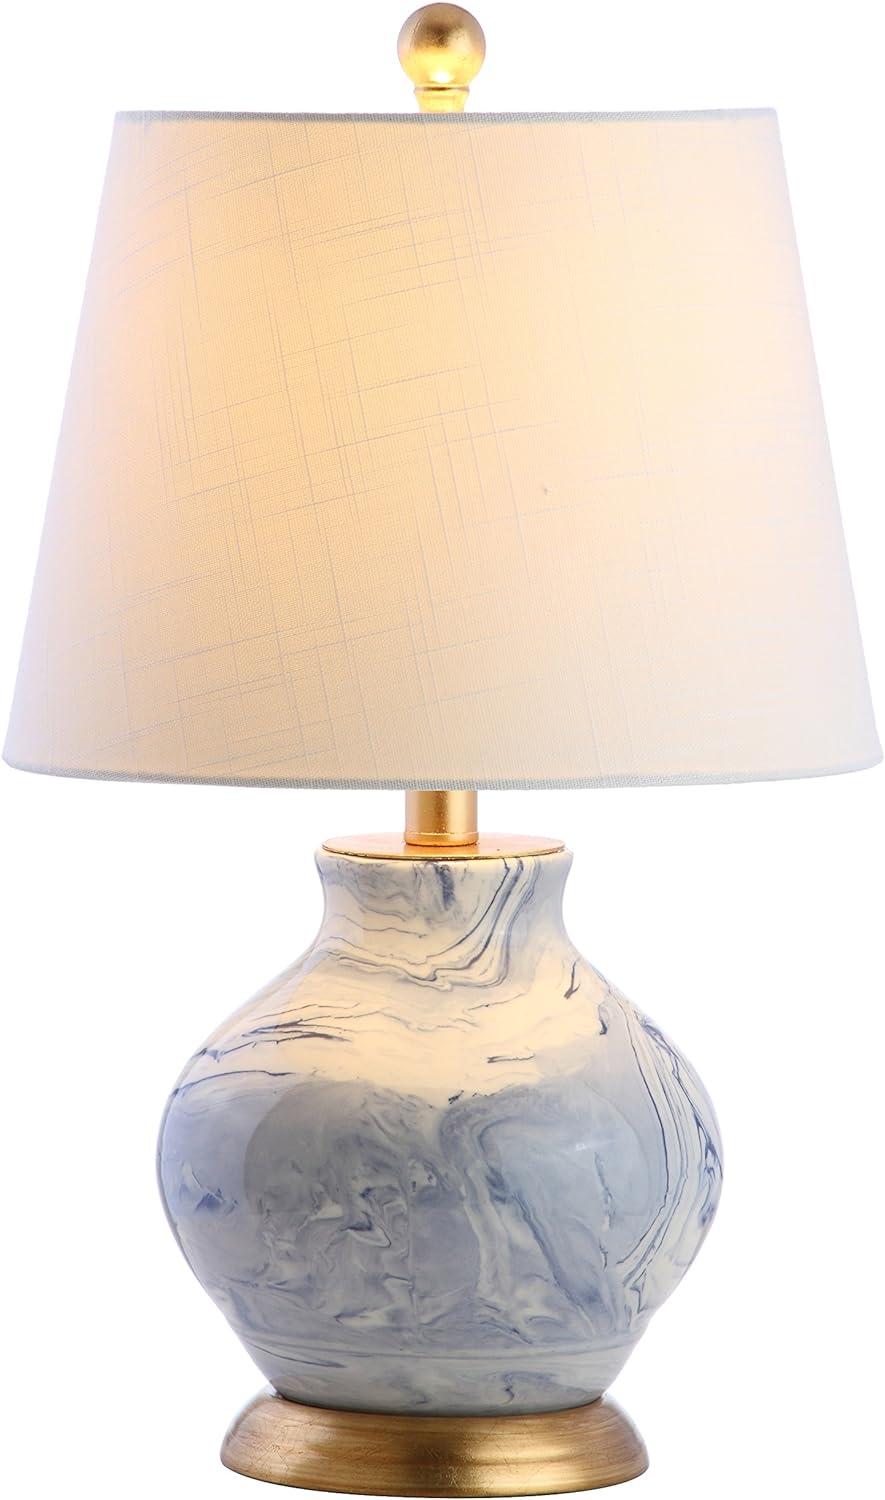 Classic 20.5" Blue and White Marbleized Ceramic Table Lamp